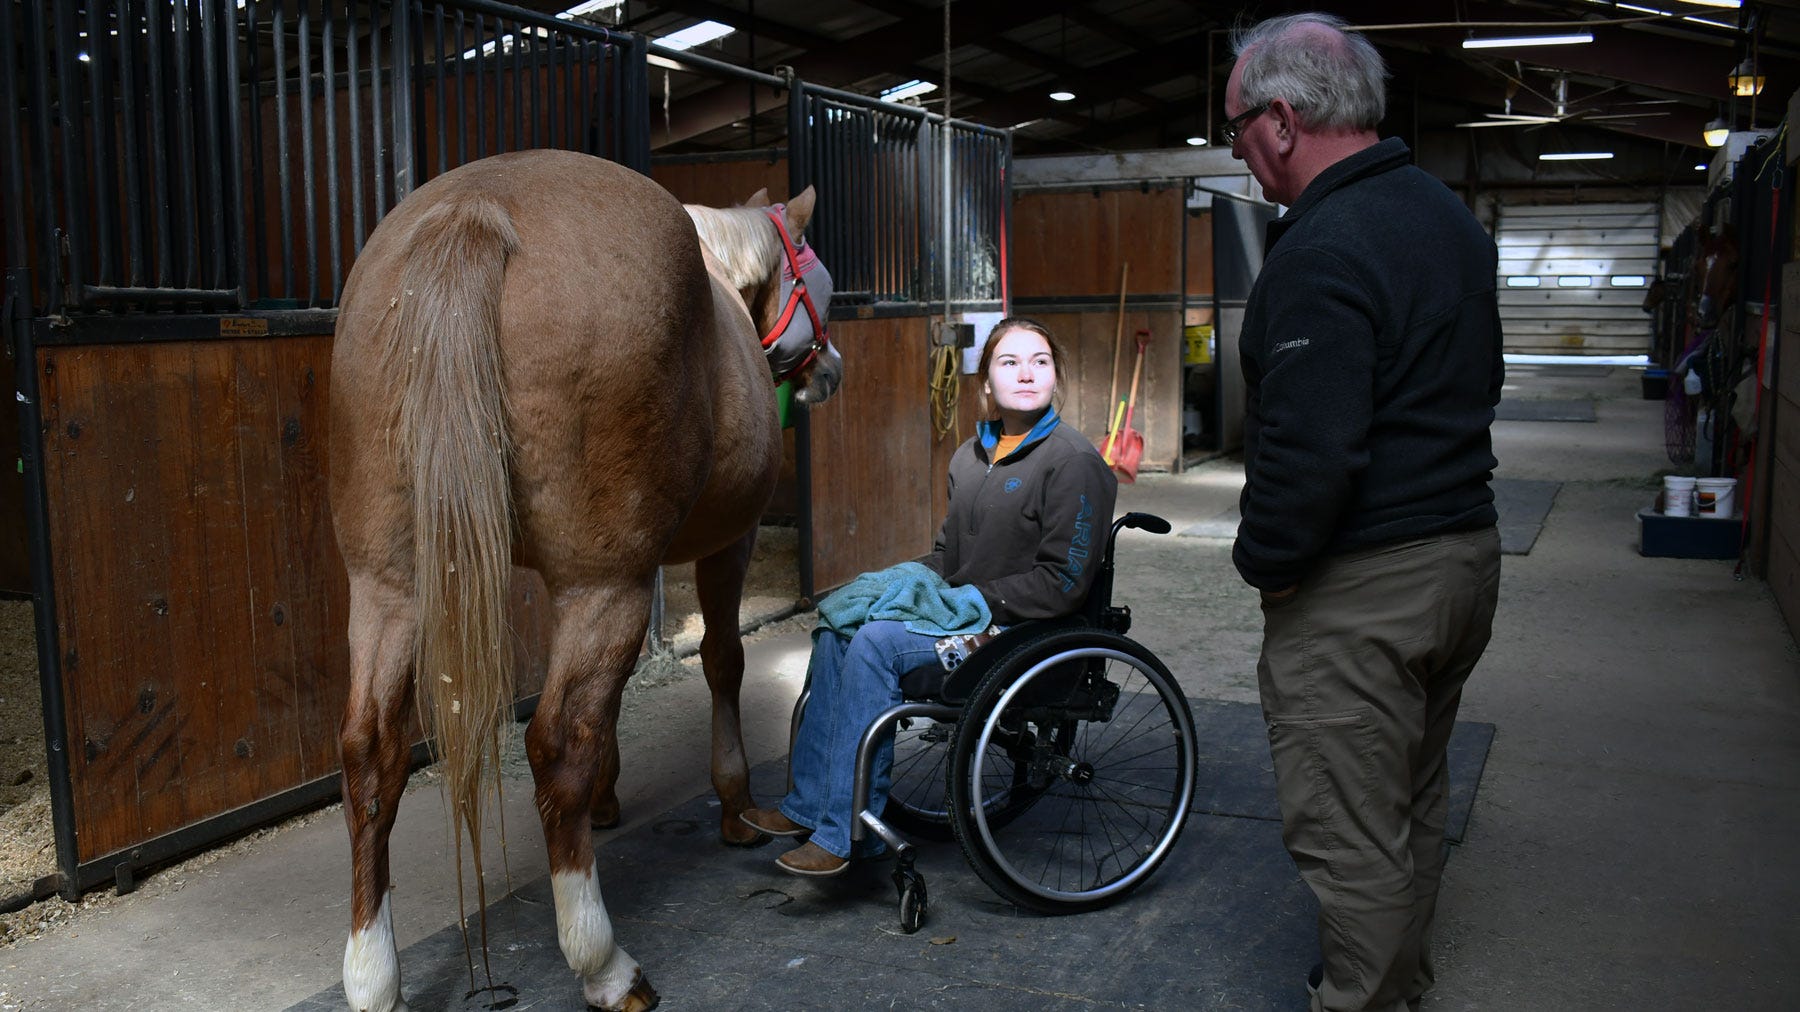 College professor speaking with female student who is sitting in a wheel chair while caring for a horse in a stable.